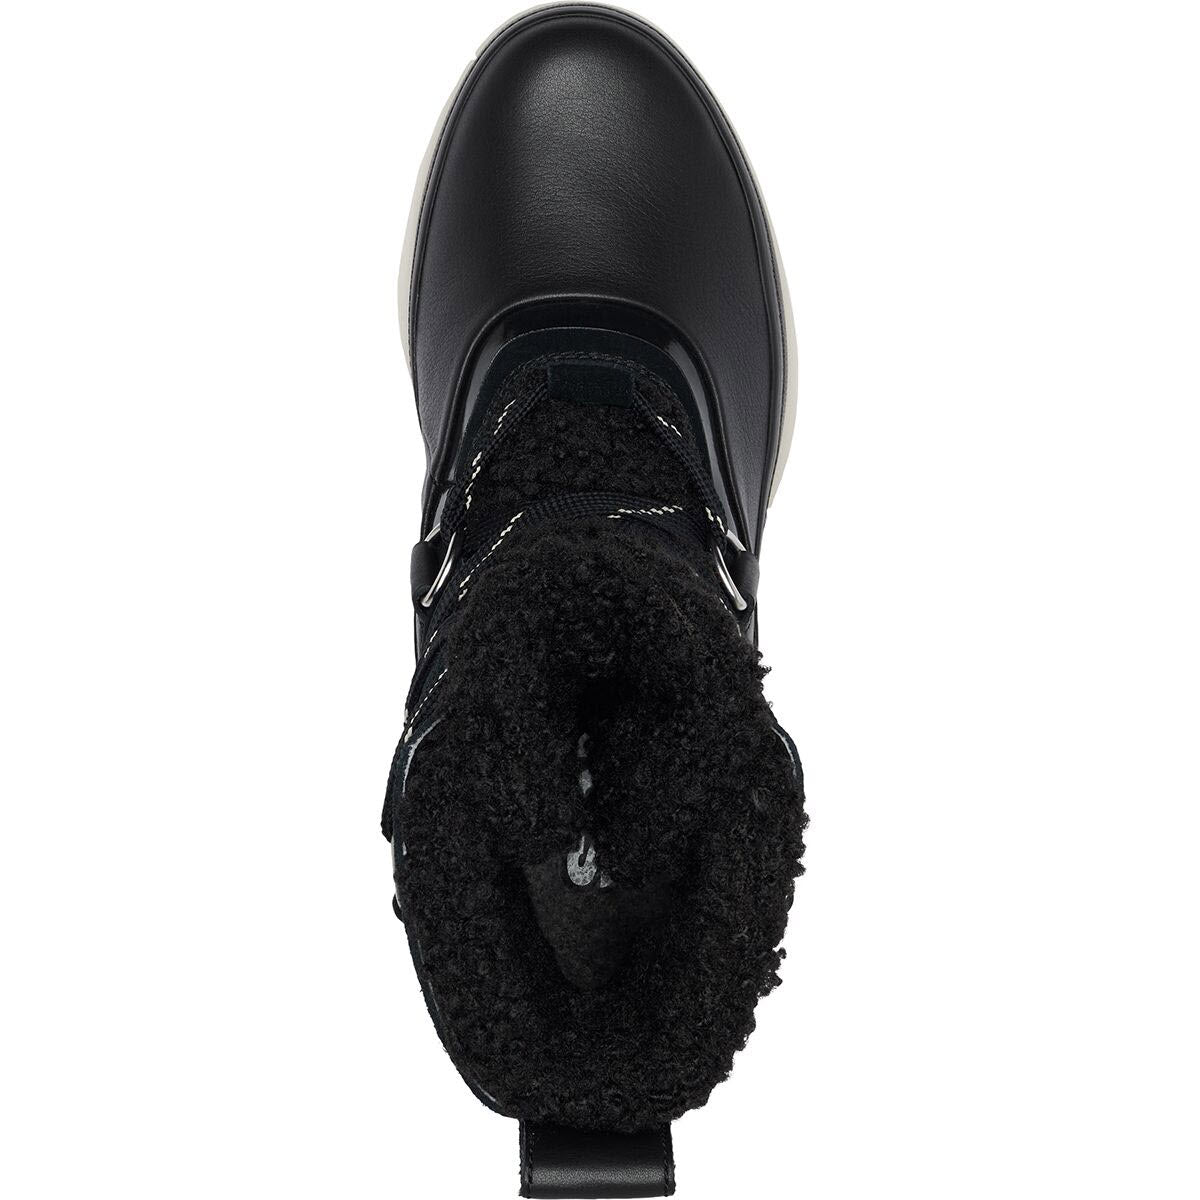 Top view of a SOREL JOAN OF ARCTIC NEXT BOOT BLACK - WOMENS by Sorel with fur lining, reflective laces, and a high-traction sole.